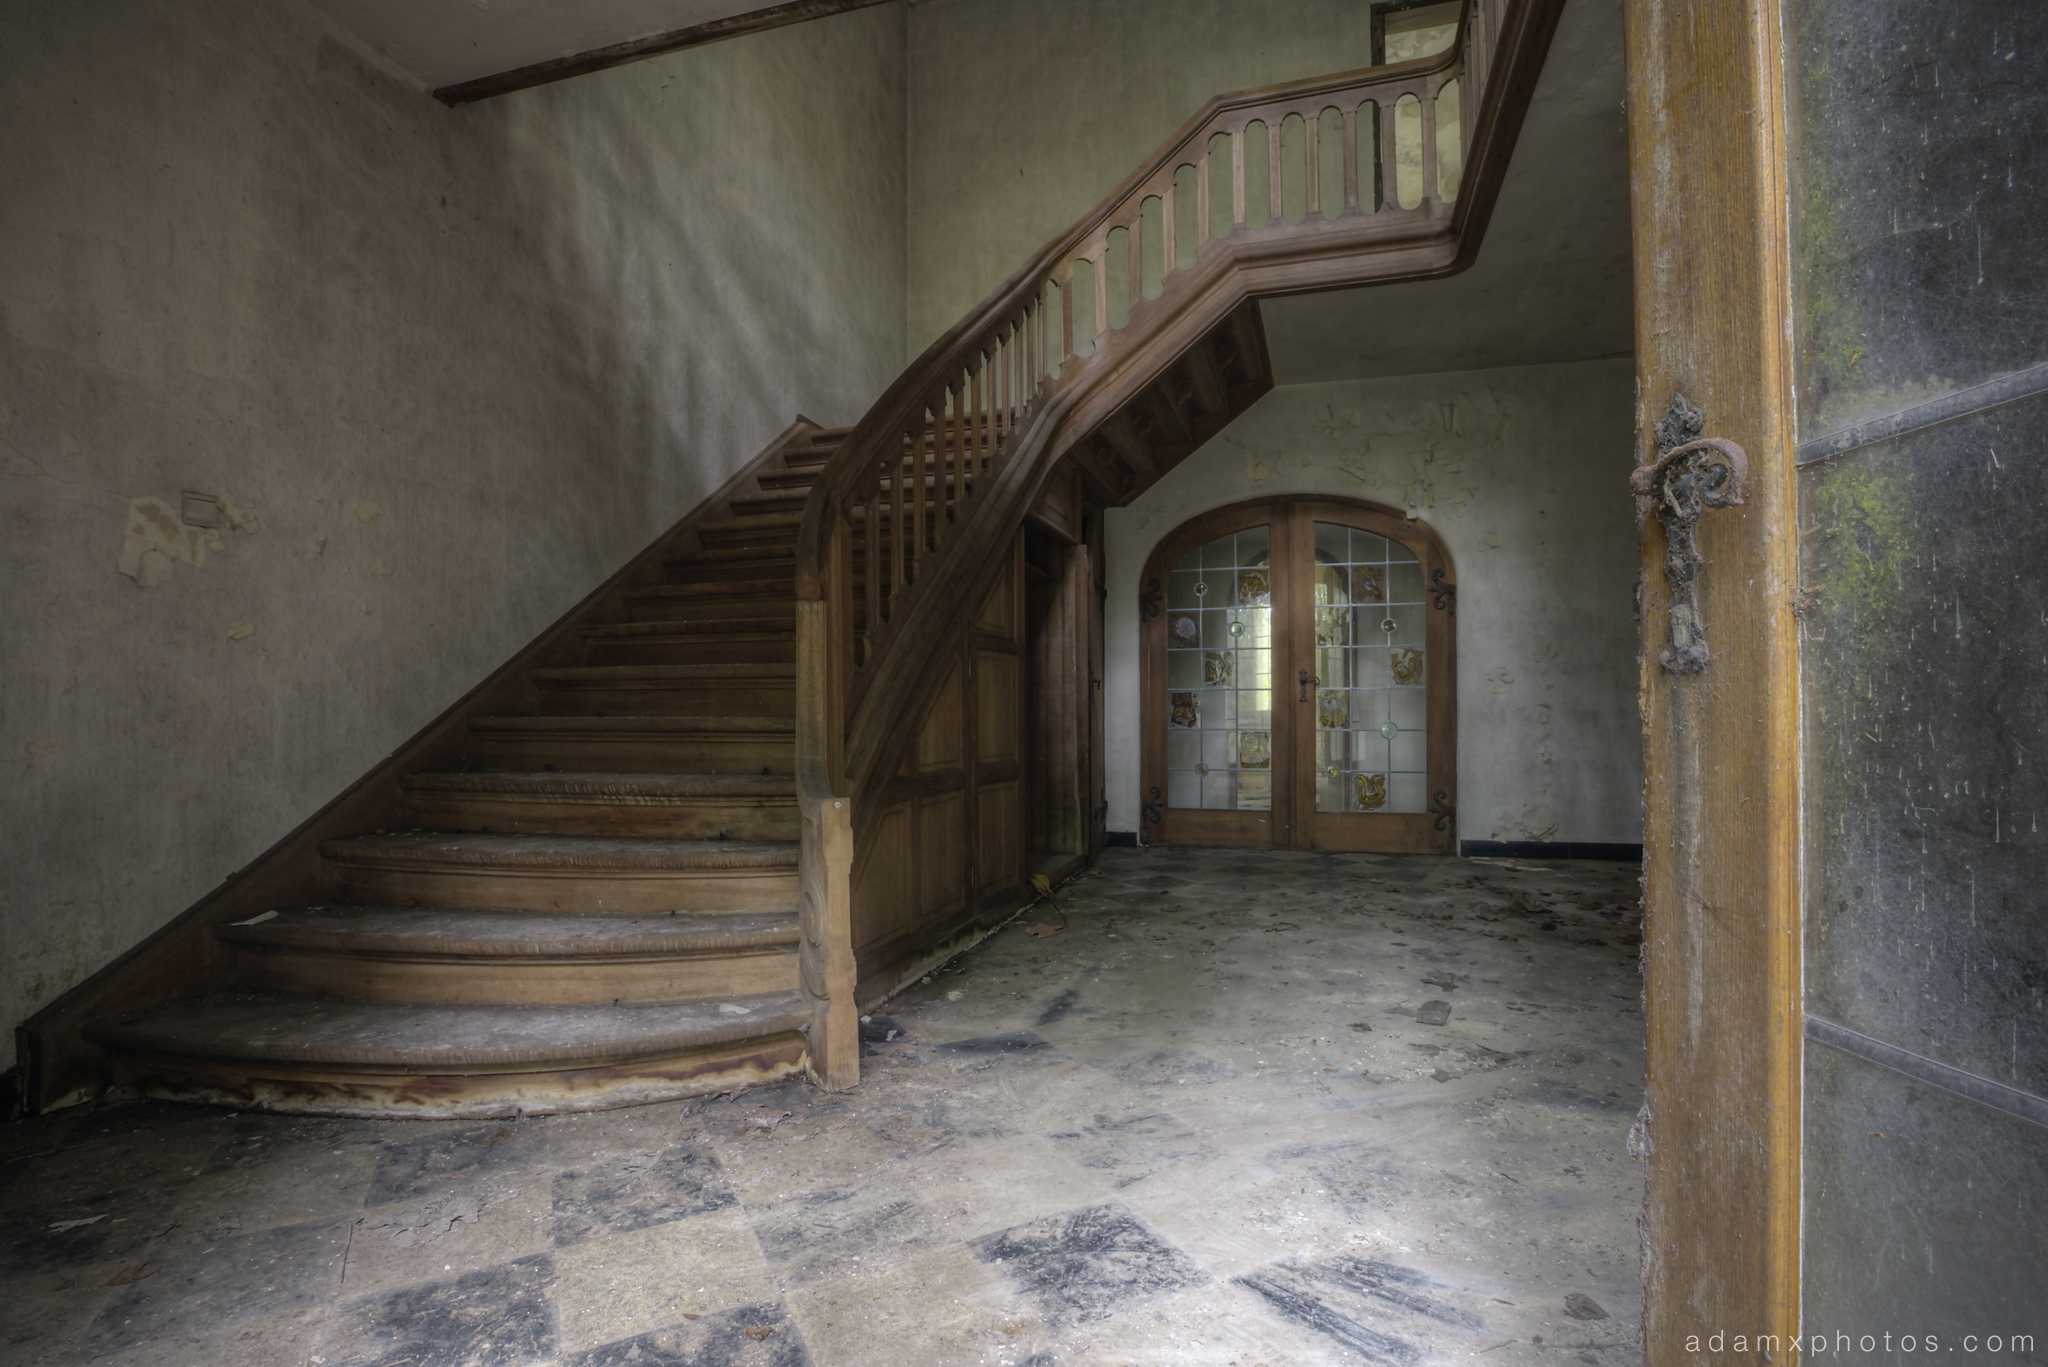 Downstairs entrance stairs staircase grand Adam X Urbex UE Urban Exploration Belgium Villa Maison SS House Townhouse abandoned derelict unused empty disused decay decayed decaying grimy grime collapsing overgrown